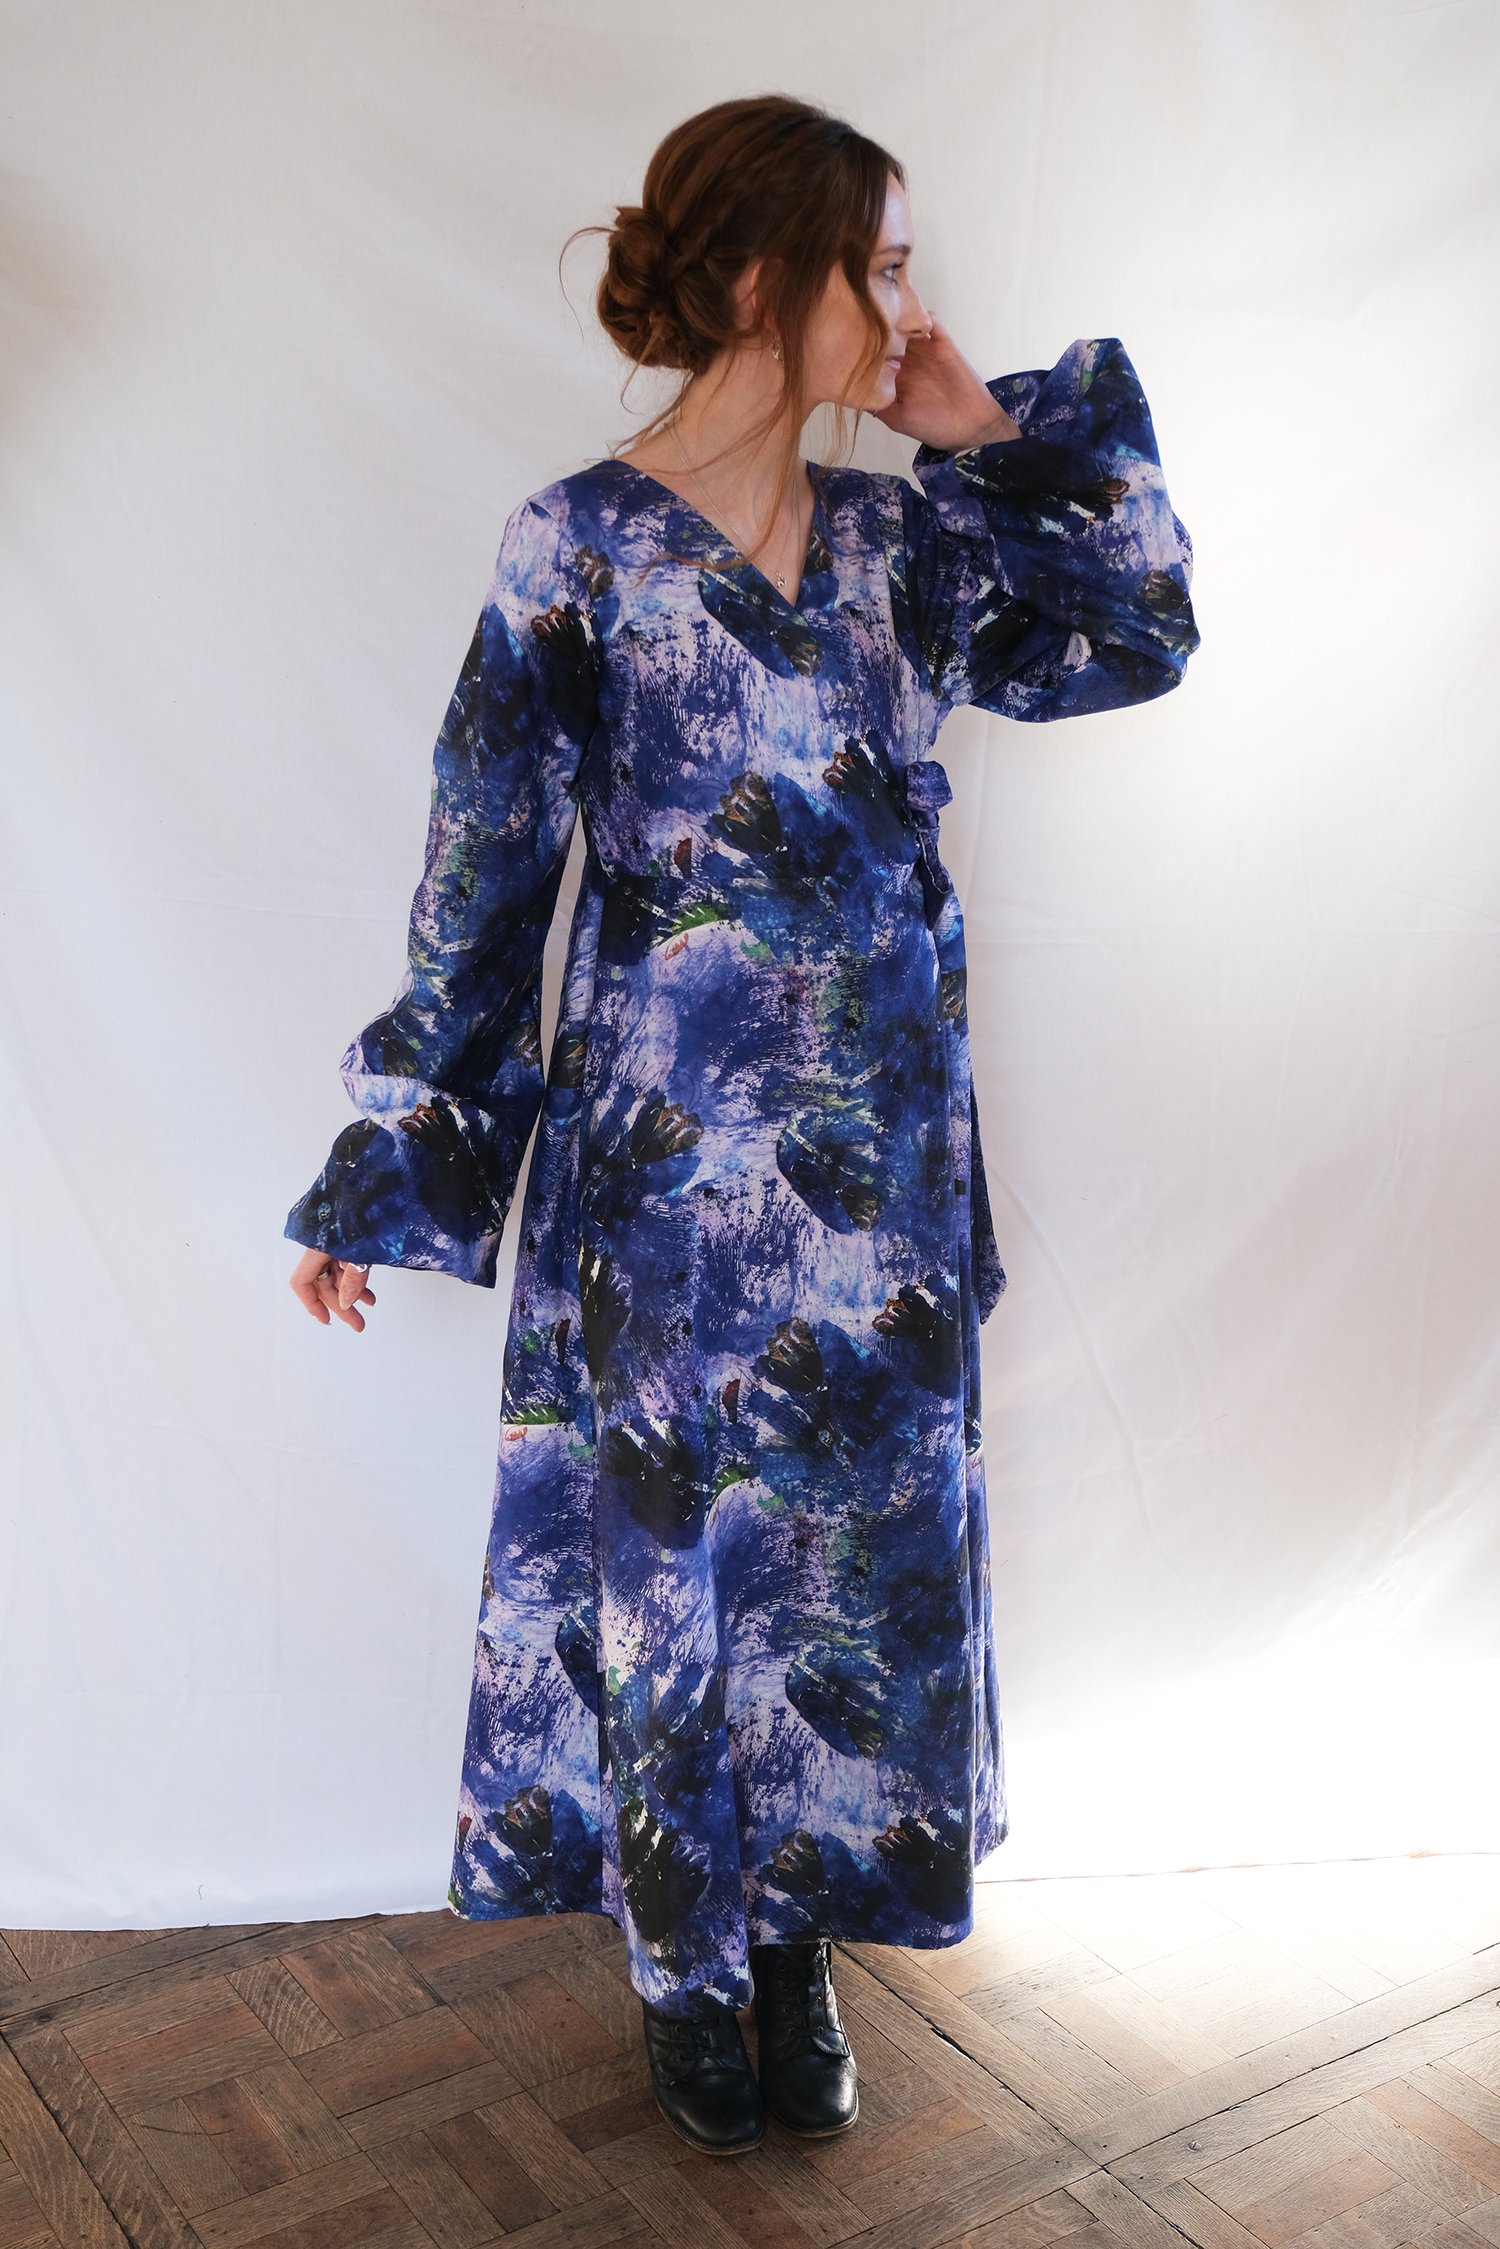 Image of S/S 22 Watercolour  Blue Iris Wrap Dress With Side Slit. Handmade to Order. Choice of 2 Fabrics.